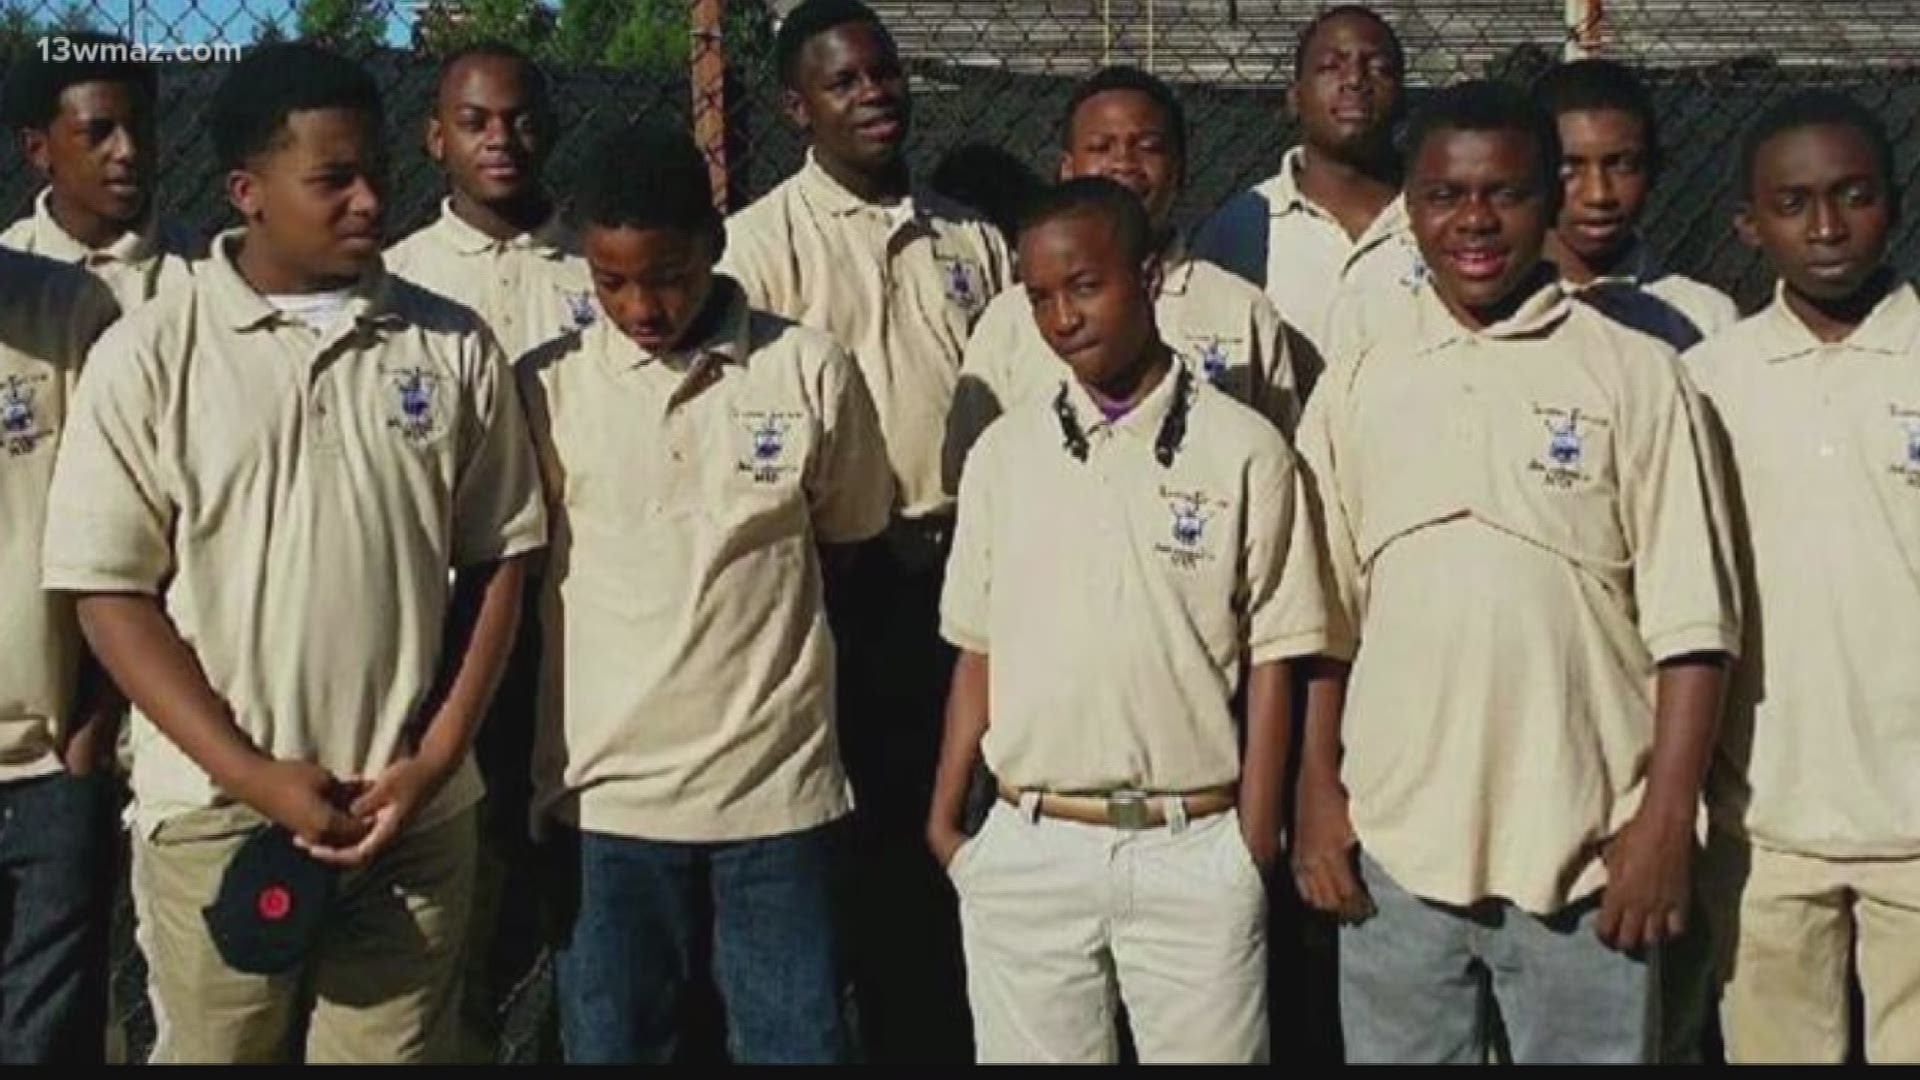 Group mentors young men in Central Georgia